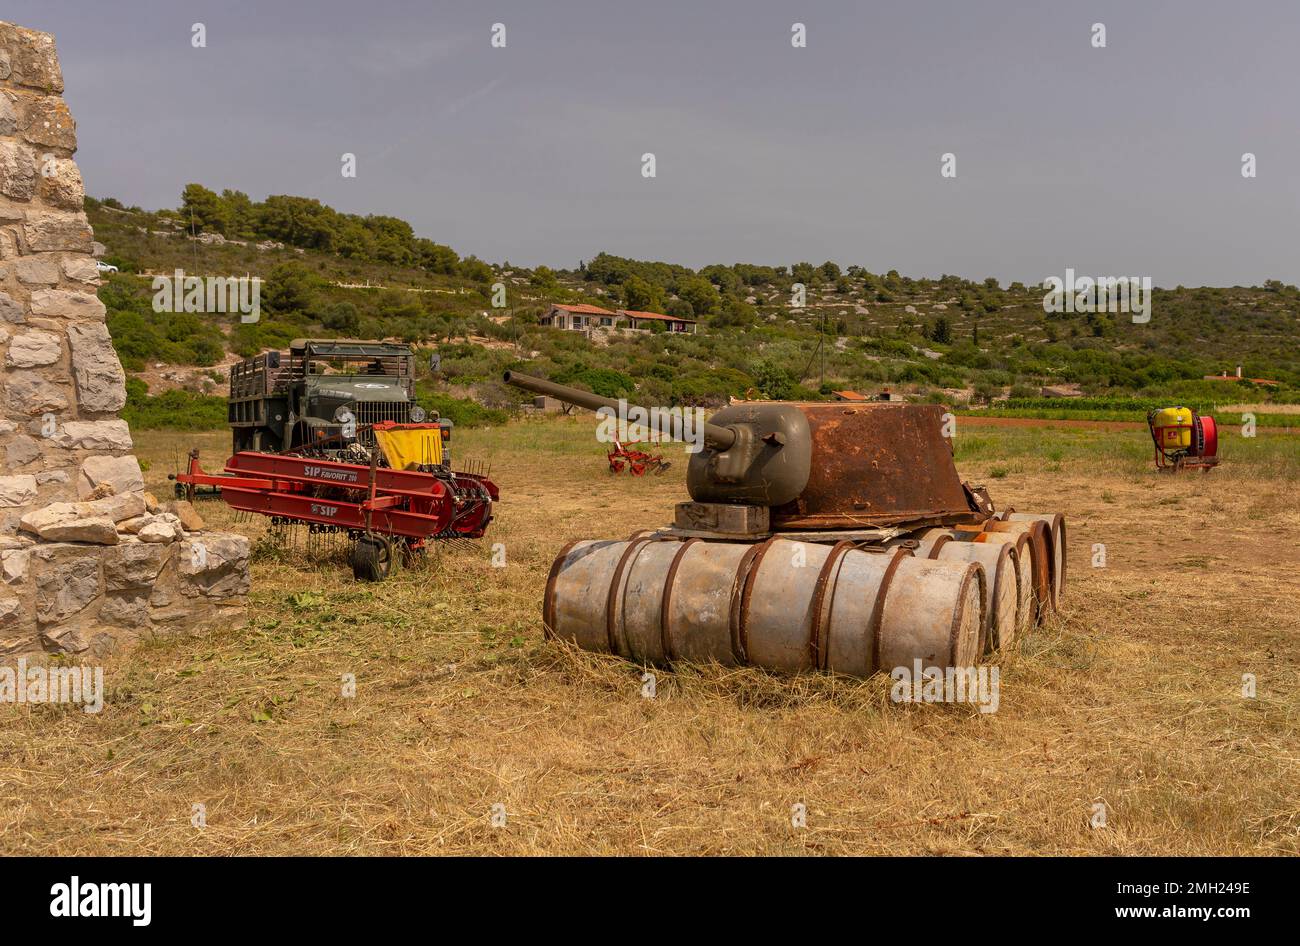 VIS, CROATIA, EUROPE - Military and farm equipment, interior of the island of Vis. Old tank turret on barrels. Stock Photo